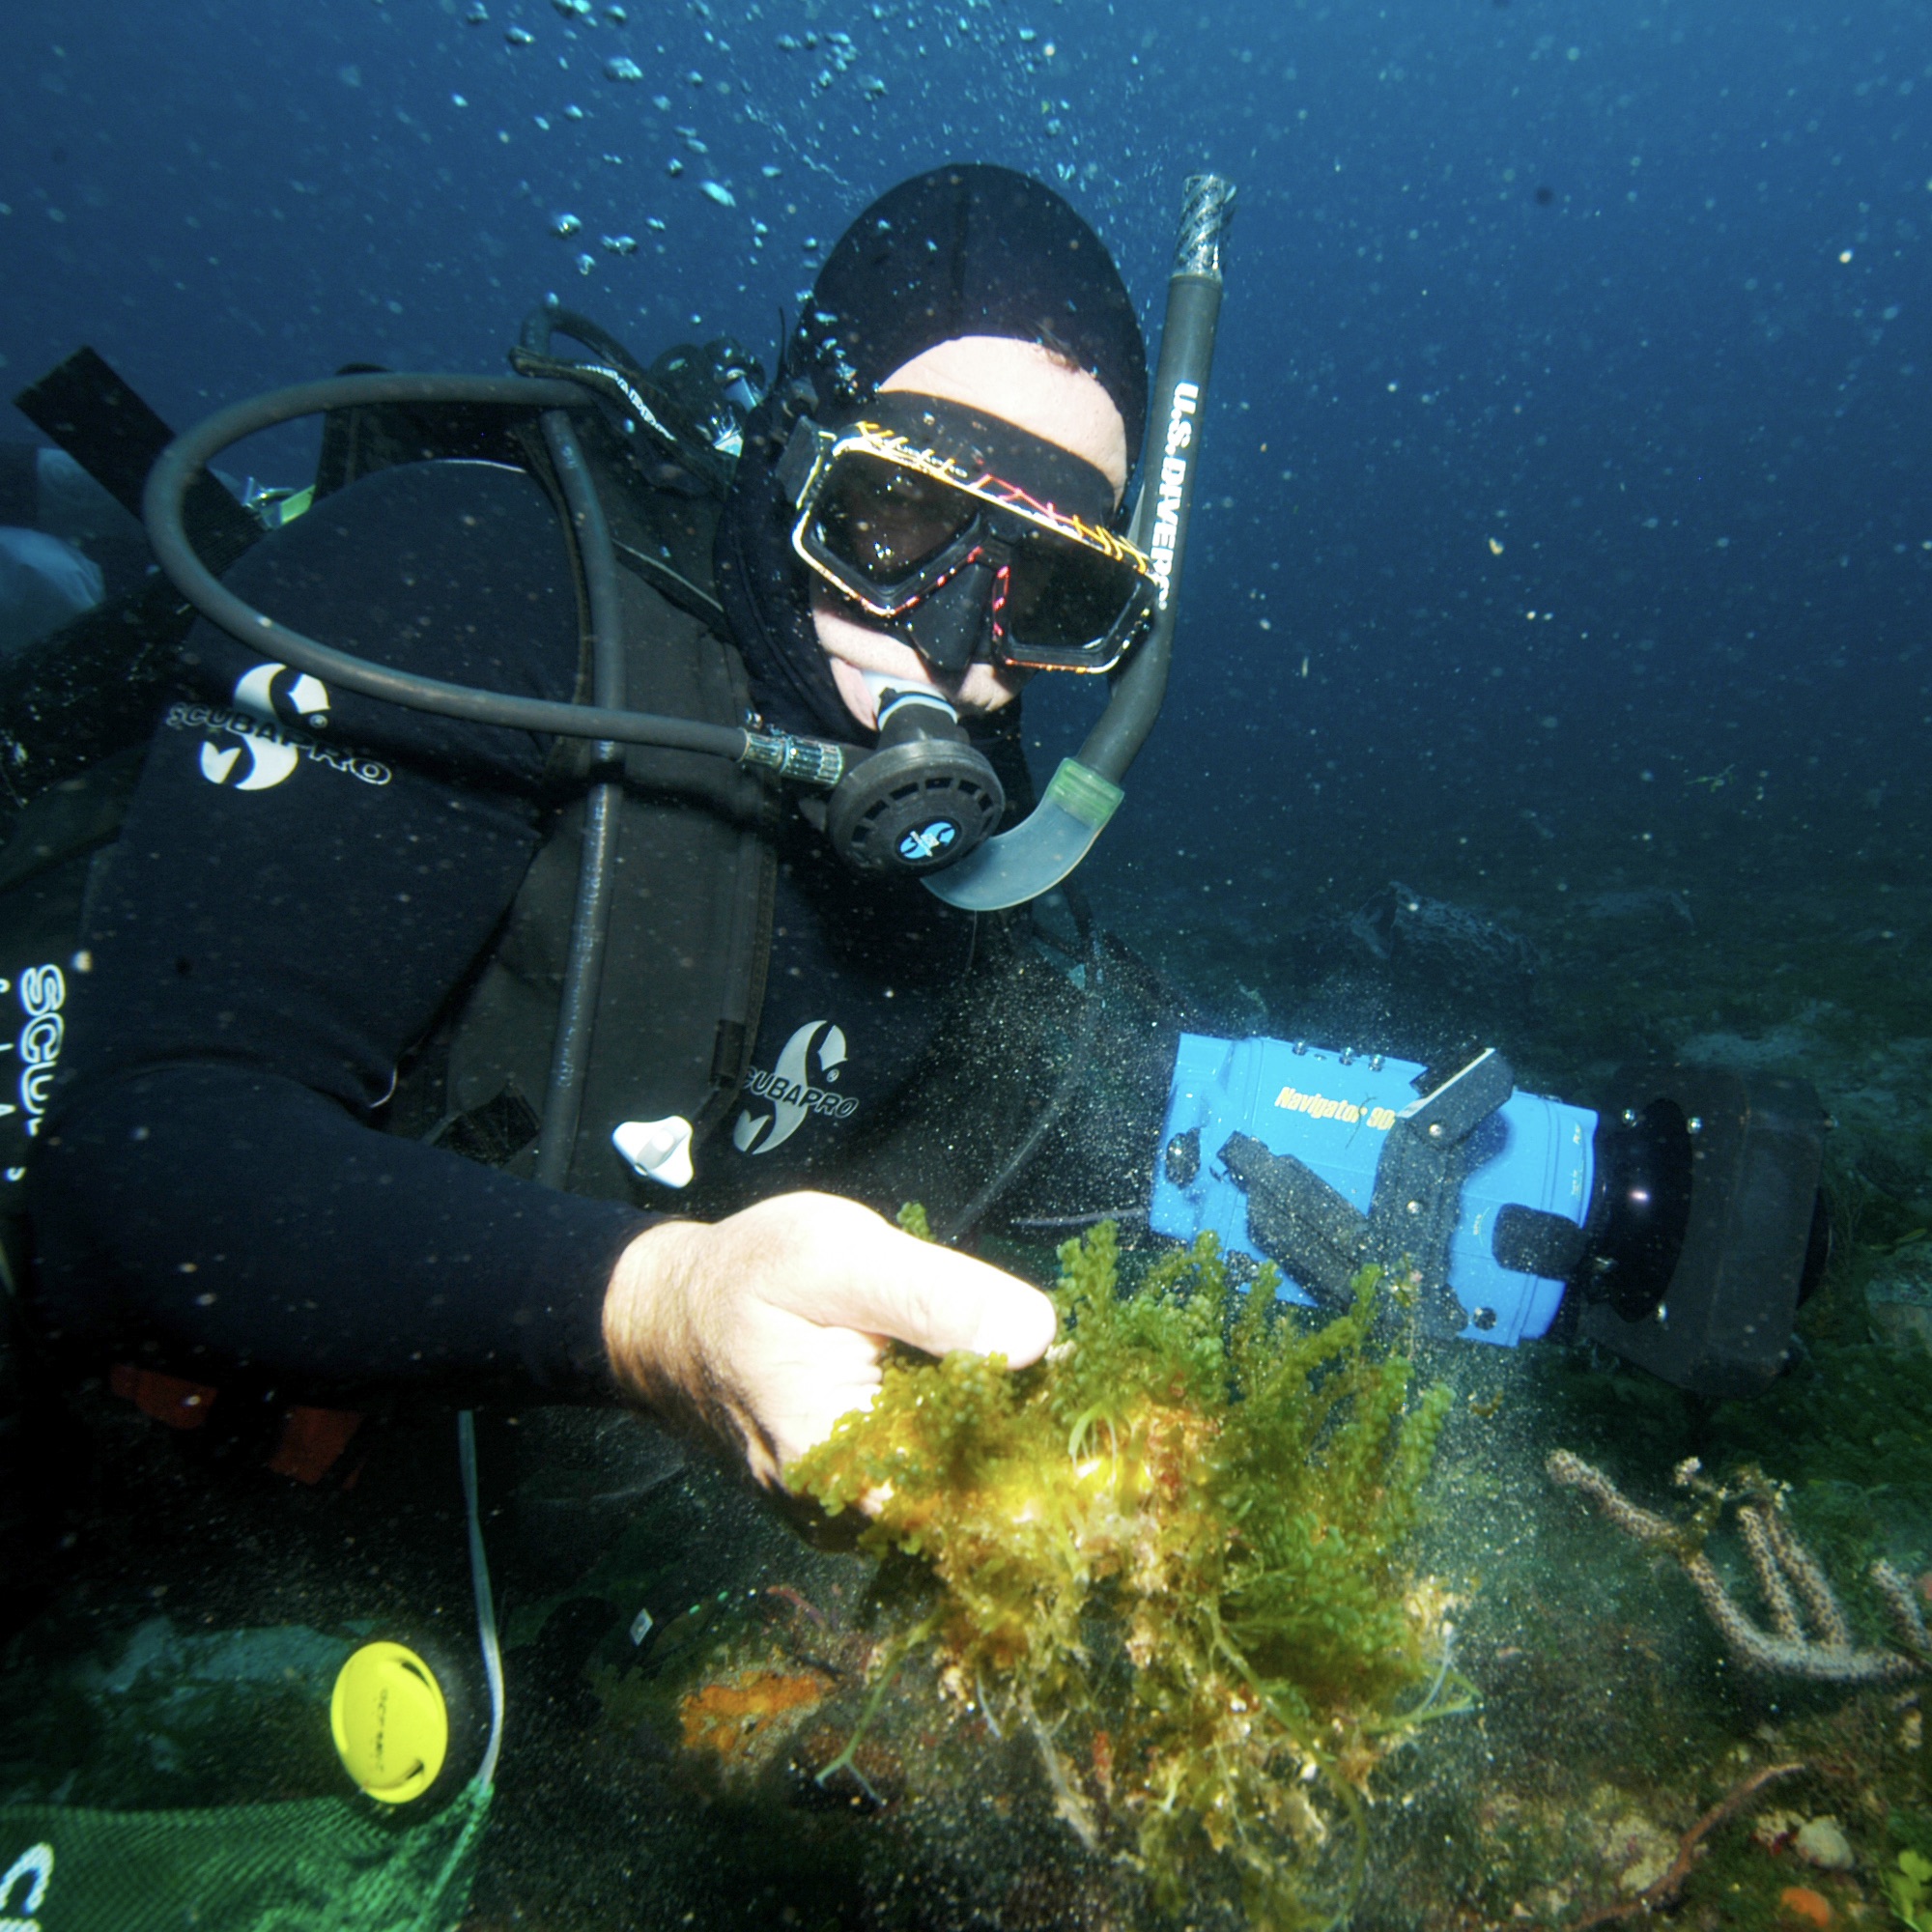 Inspecting some Caulerpa, a type of seaweed, during one of my dives.